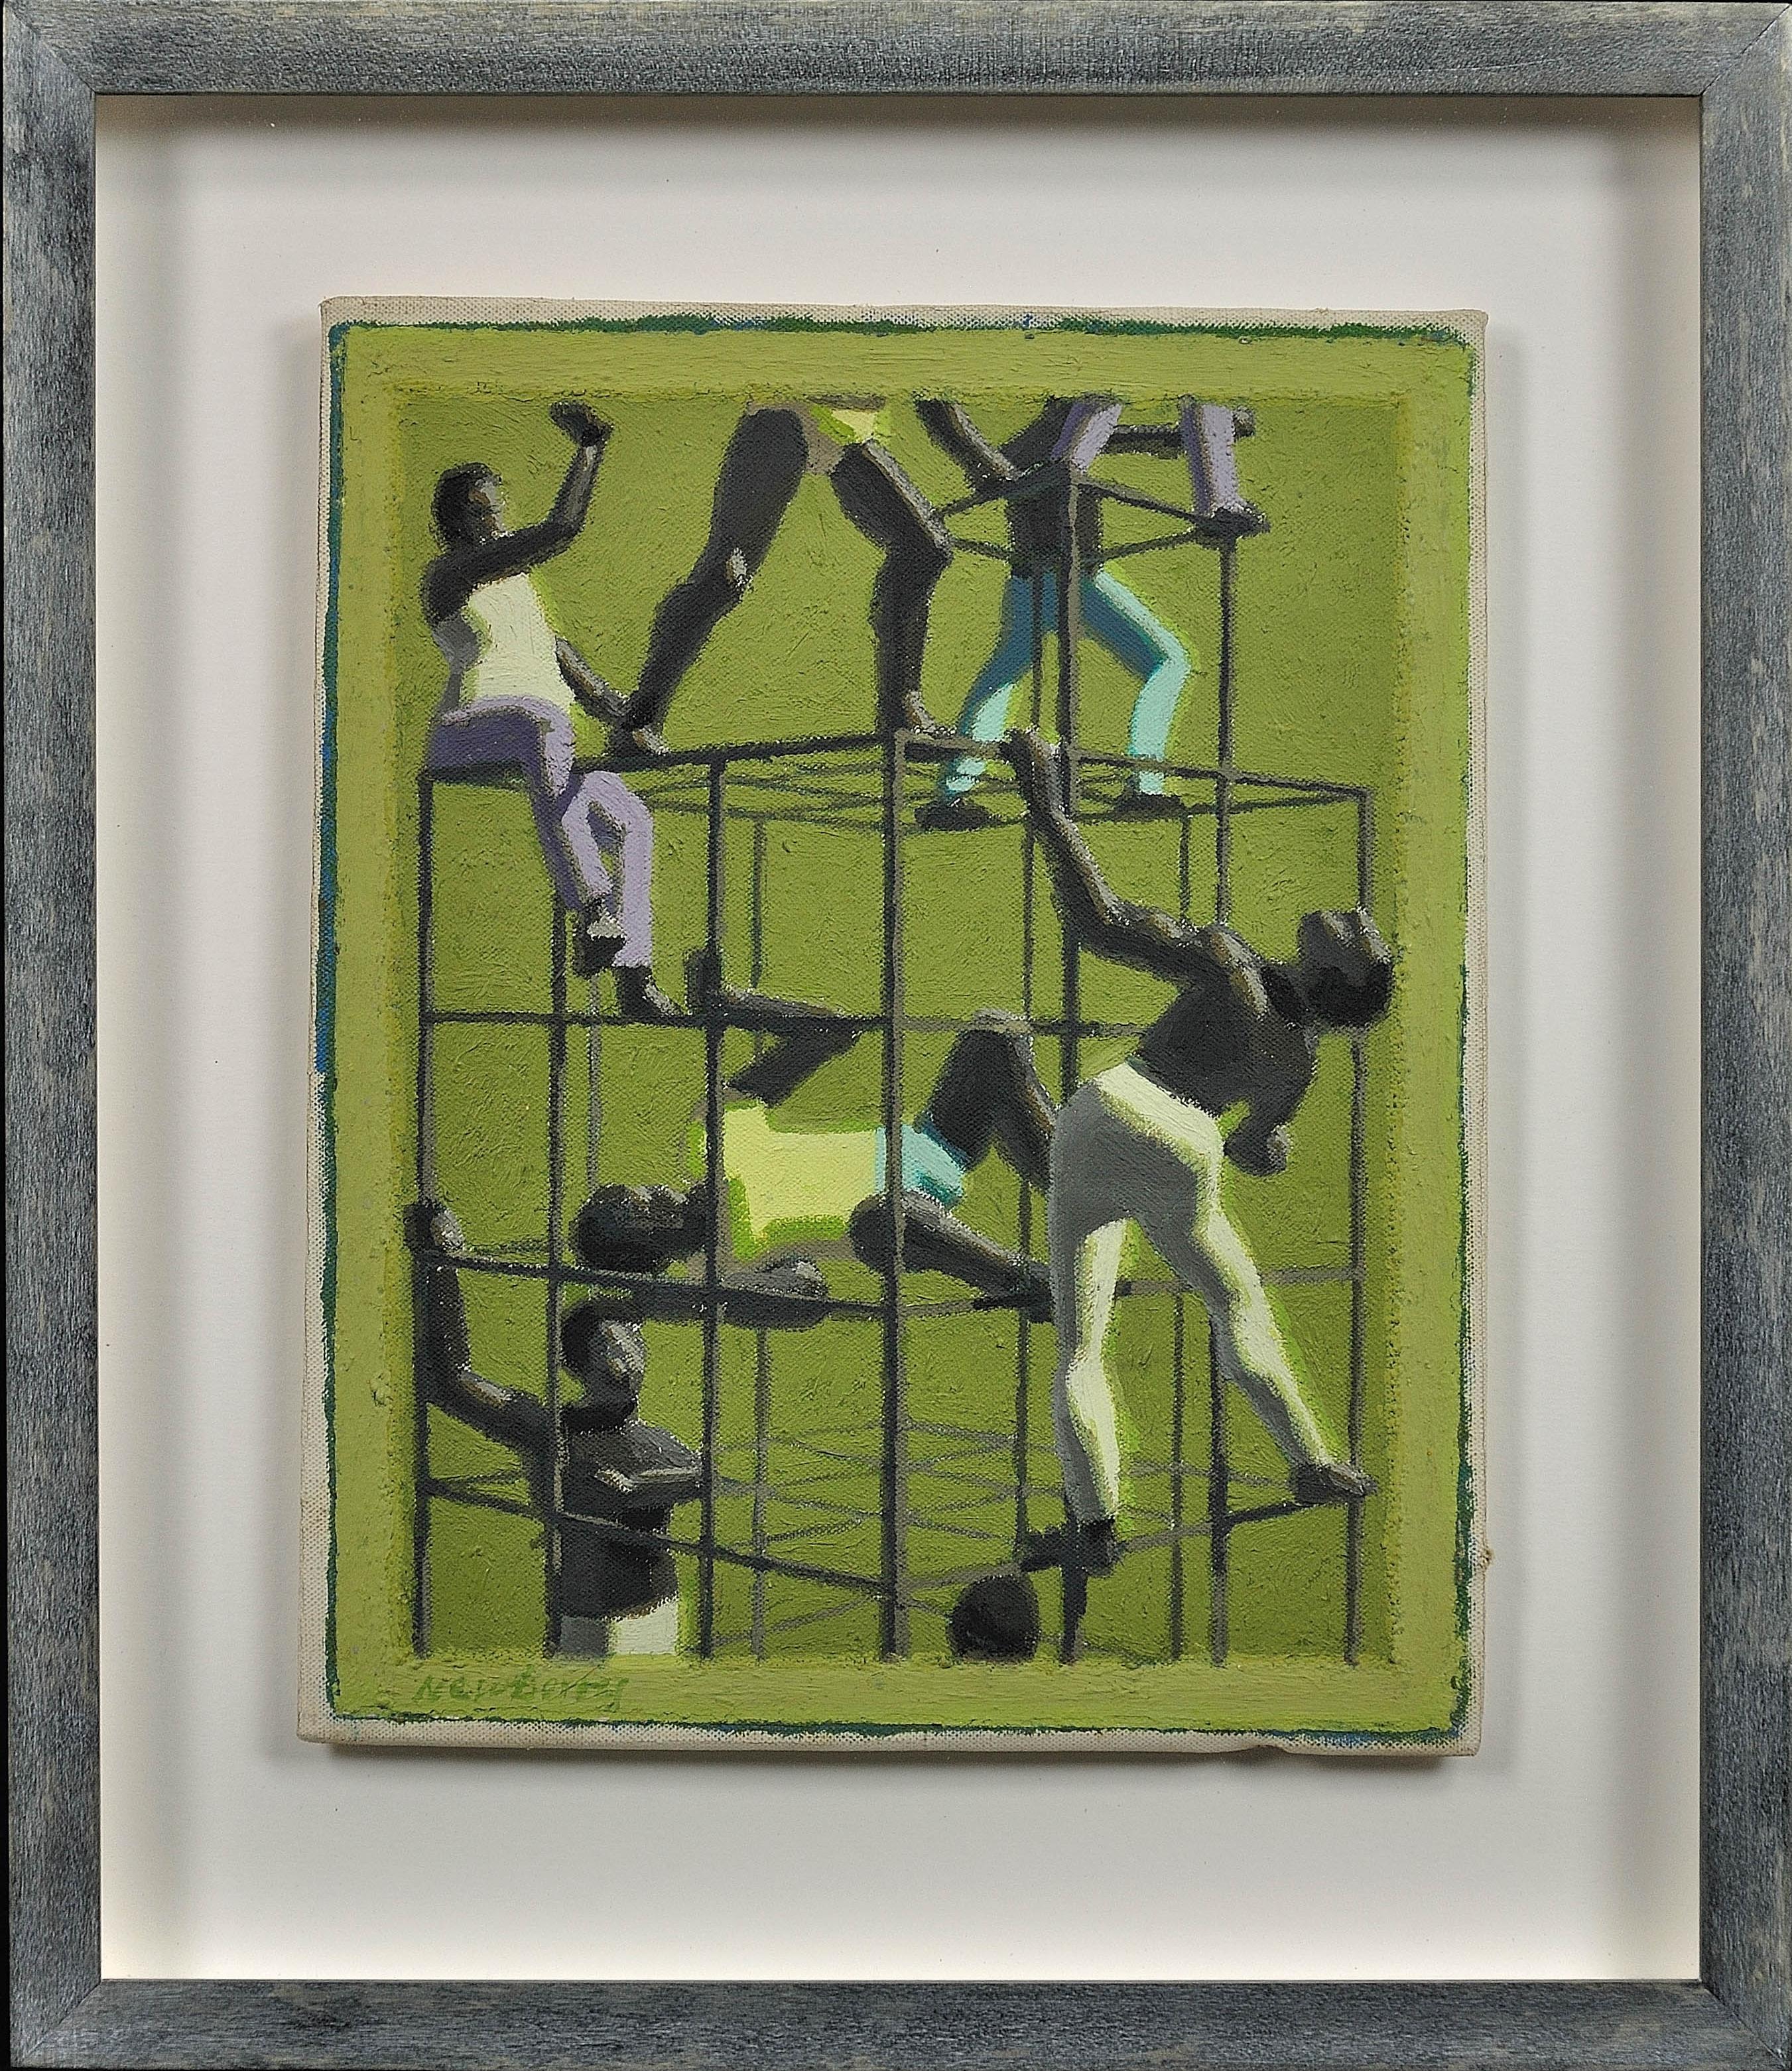 John Coverdale Newberry Abstract Painting - The Climbers, 1970. Geometric Abstract Parallel Projection.Ruskin School Oxford.